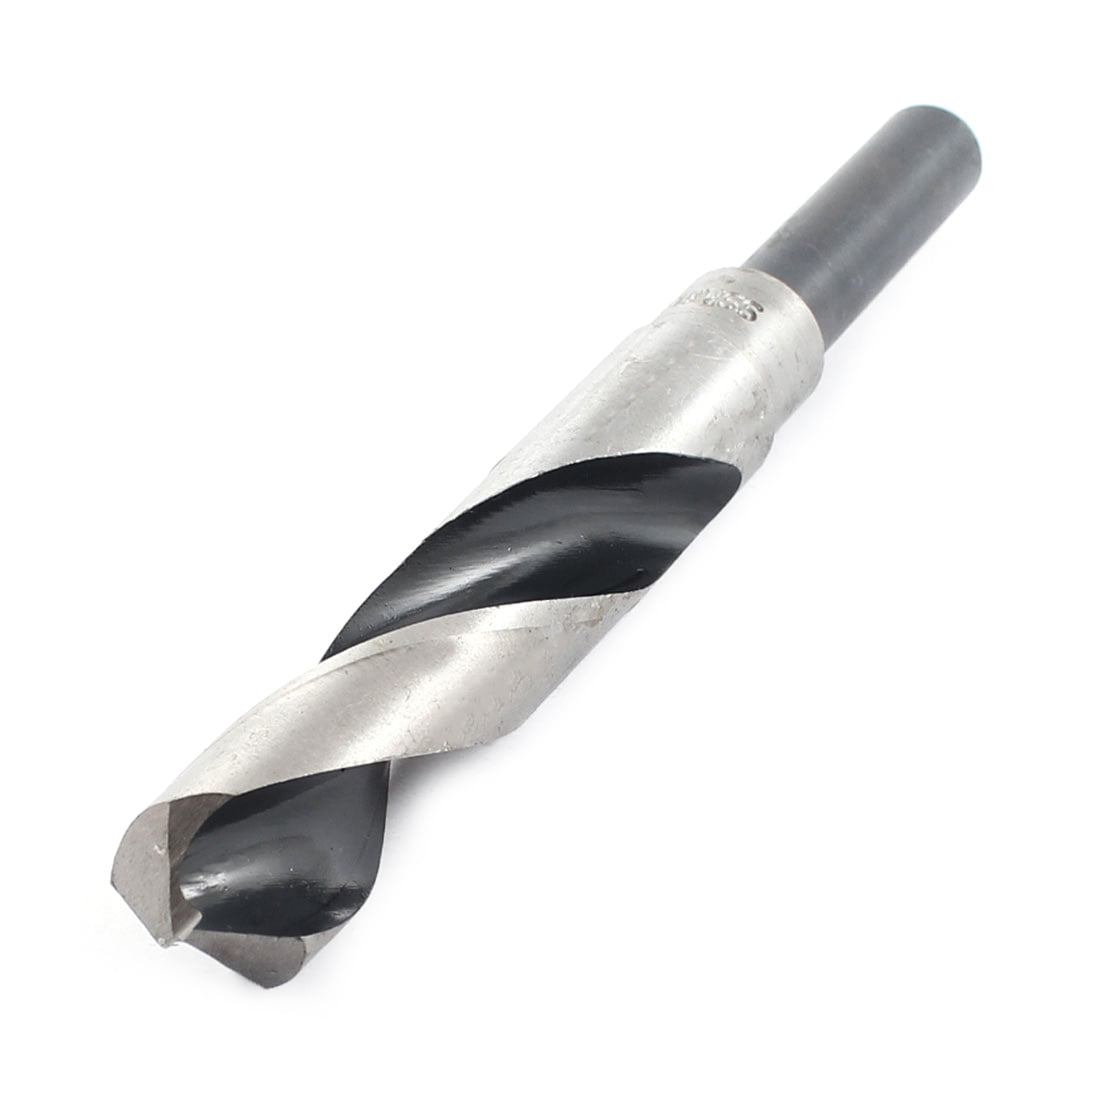 1-25/64 1/2 Reduced Shank HSS Silver and Deming Drill Bit Qualtech 